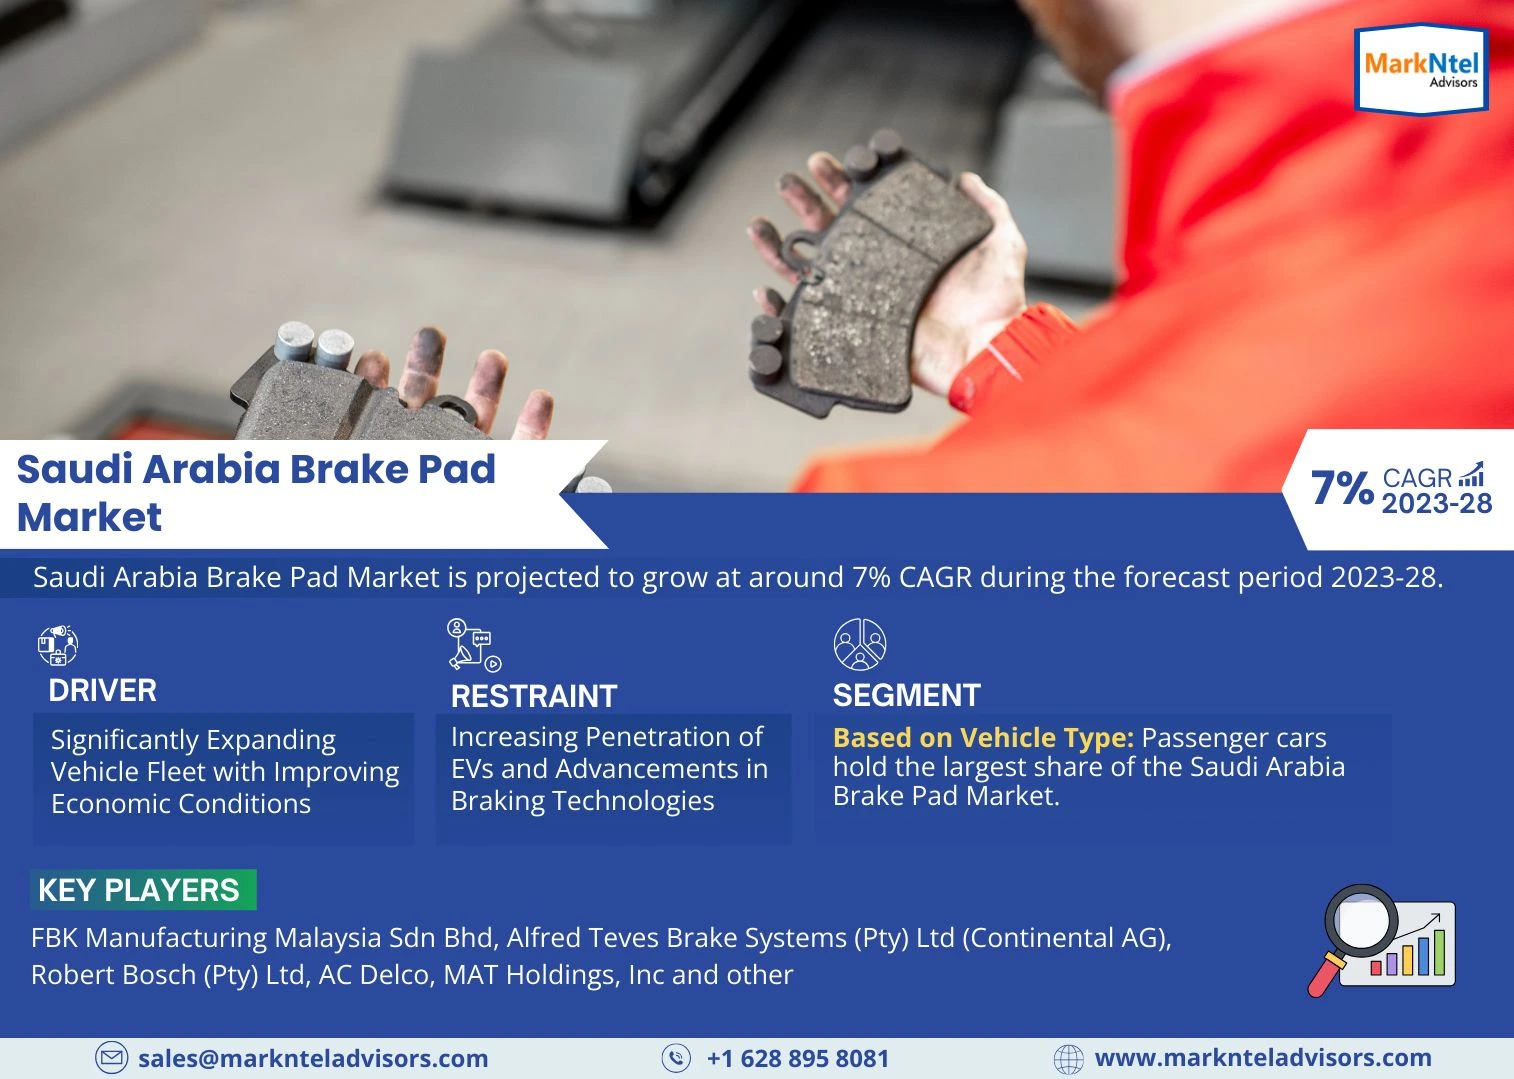 Saudi Arabia Brake Pad Market Top Competitors, Geographical Analysis, and Growth Forecast | Latest Study 2023-28